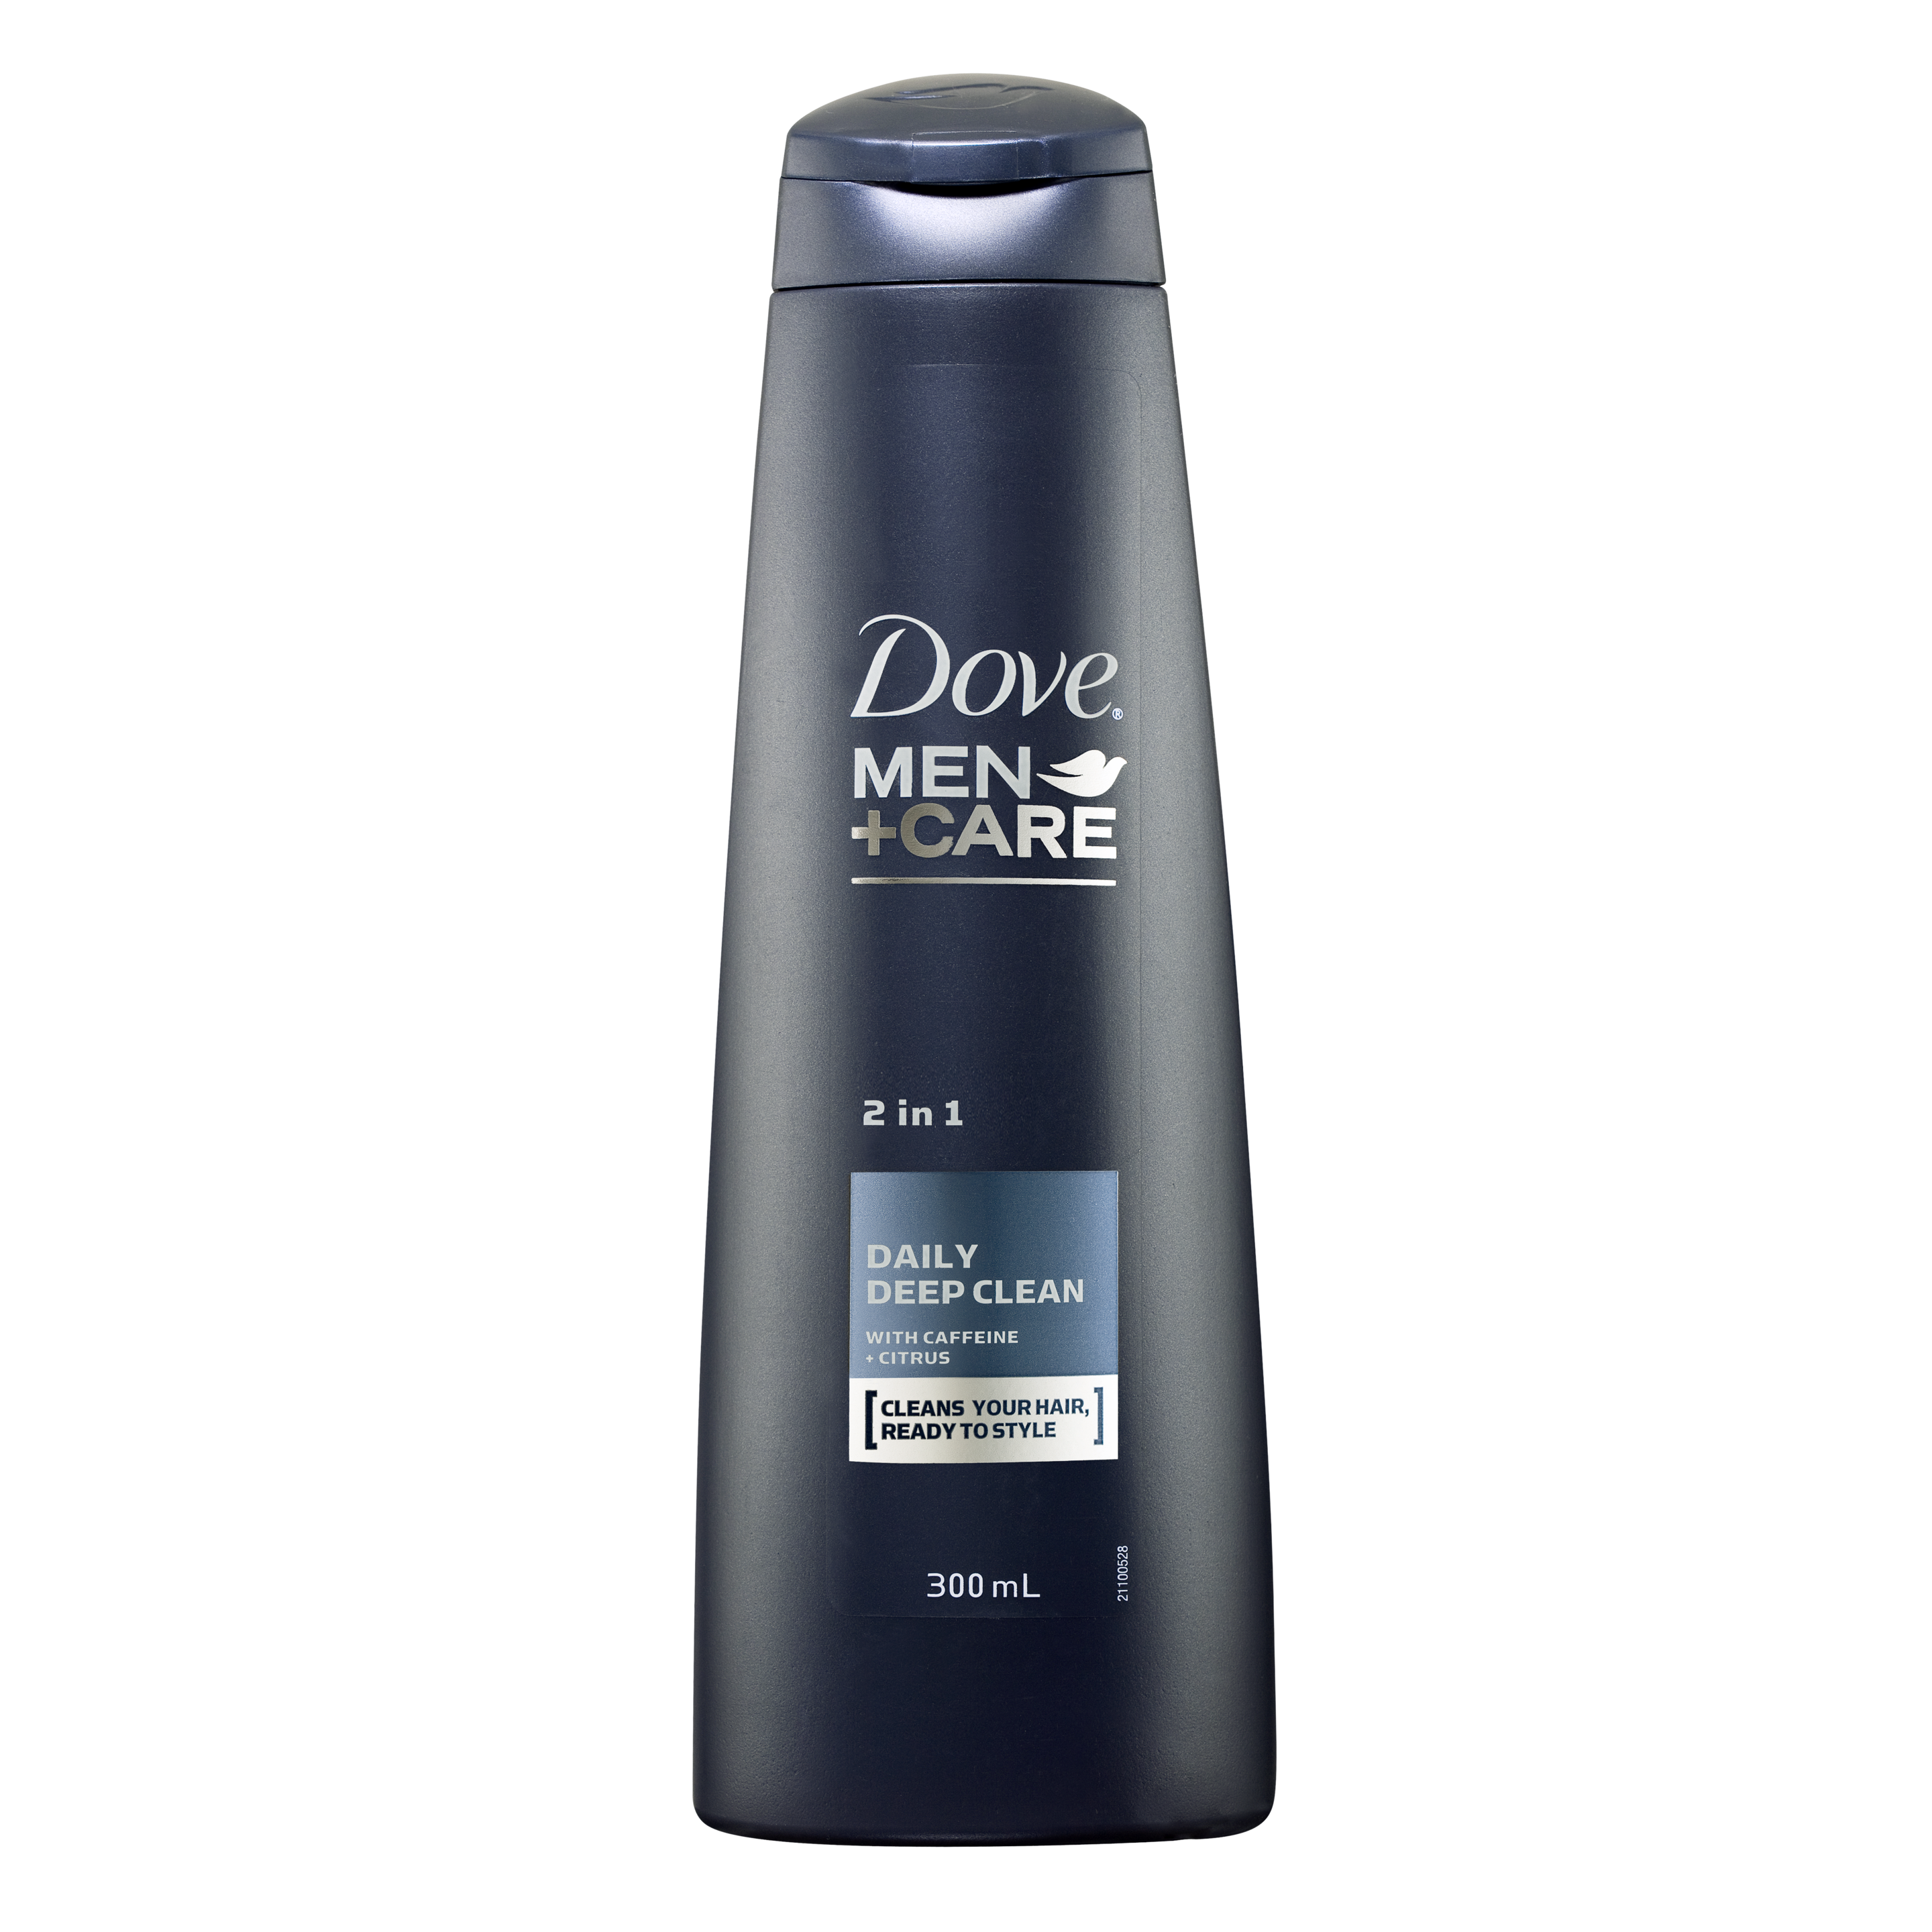 Men+Care Daily Deep Clean Fortifying 2 in 1 Shampoo | Dove